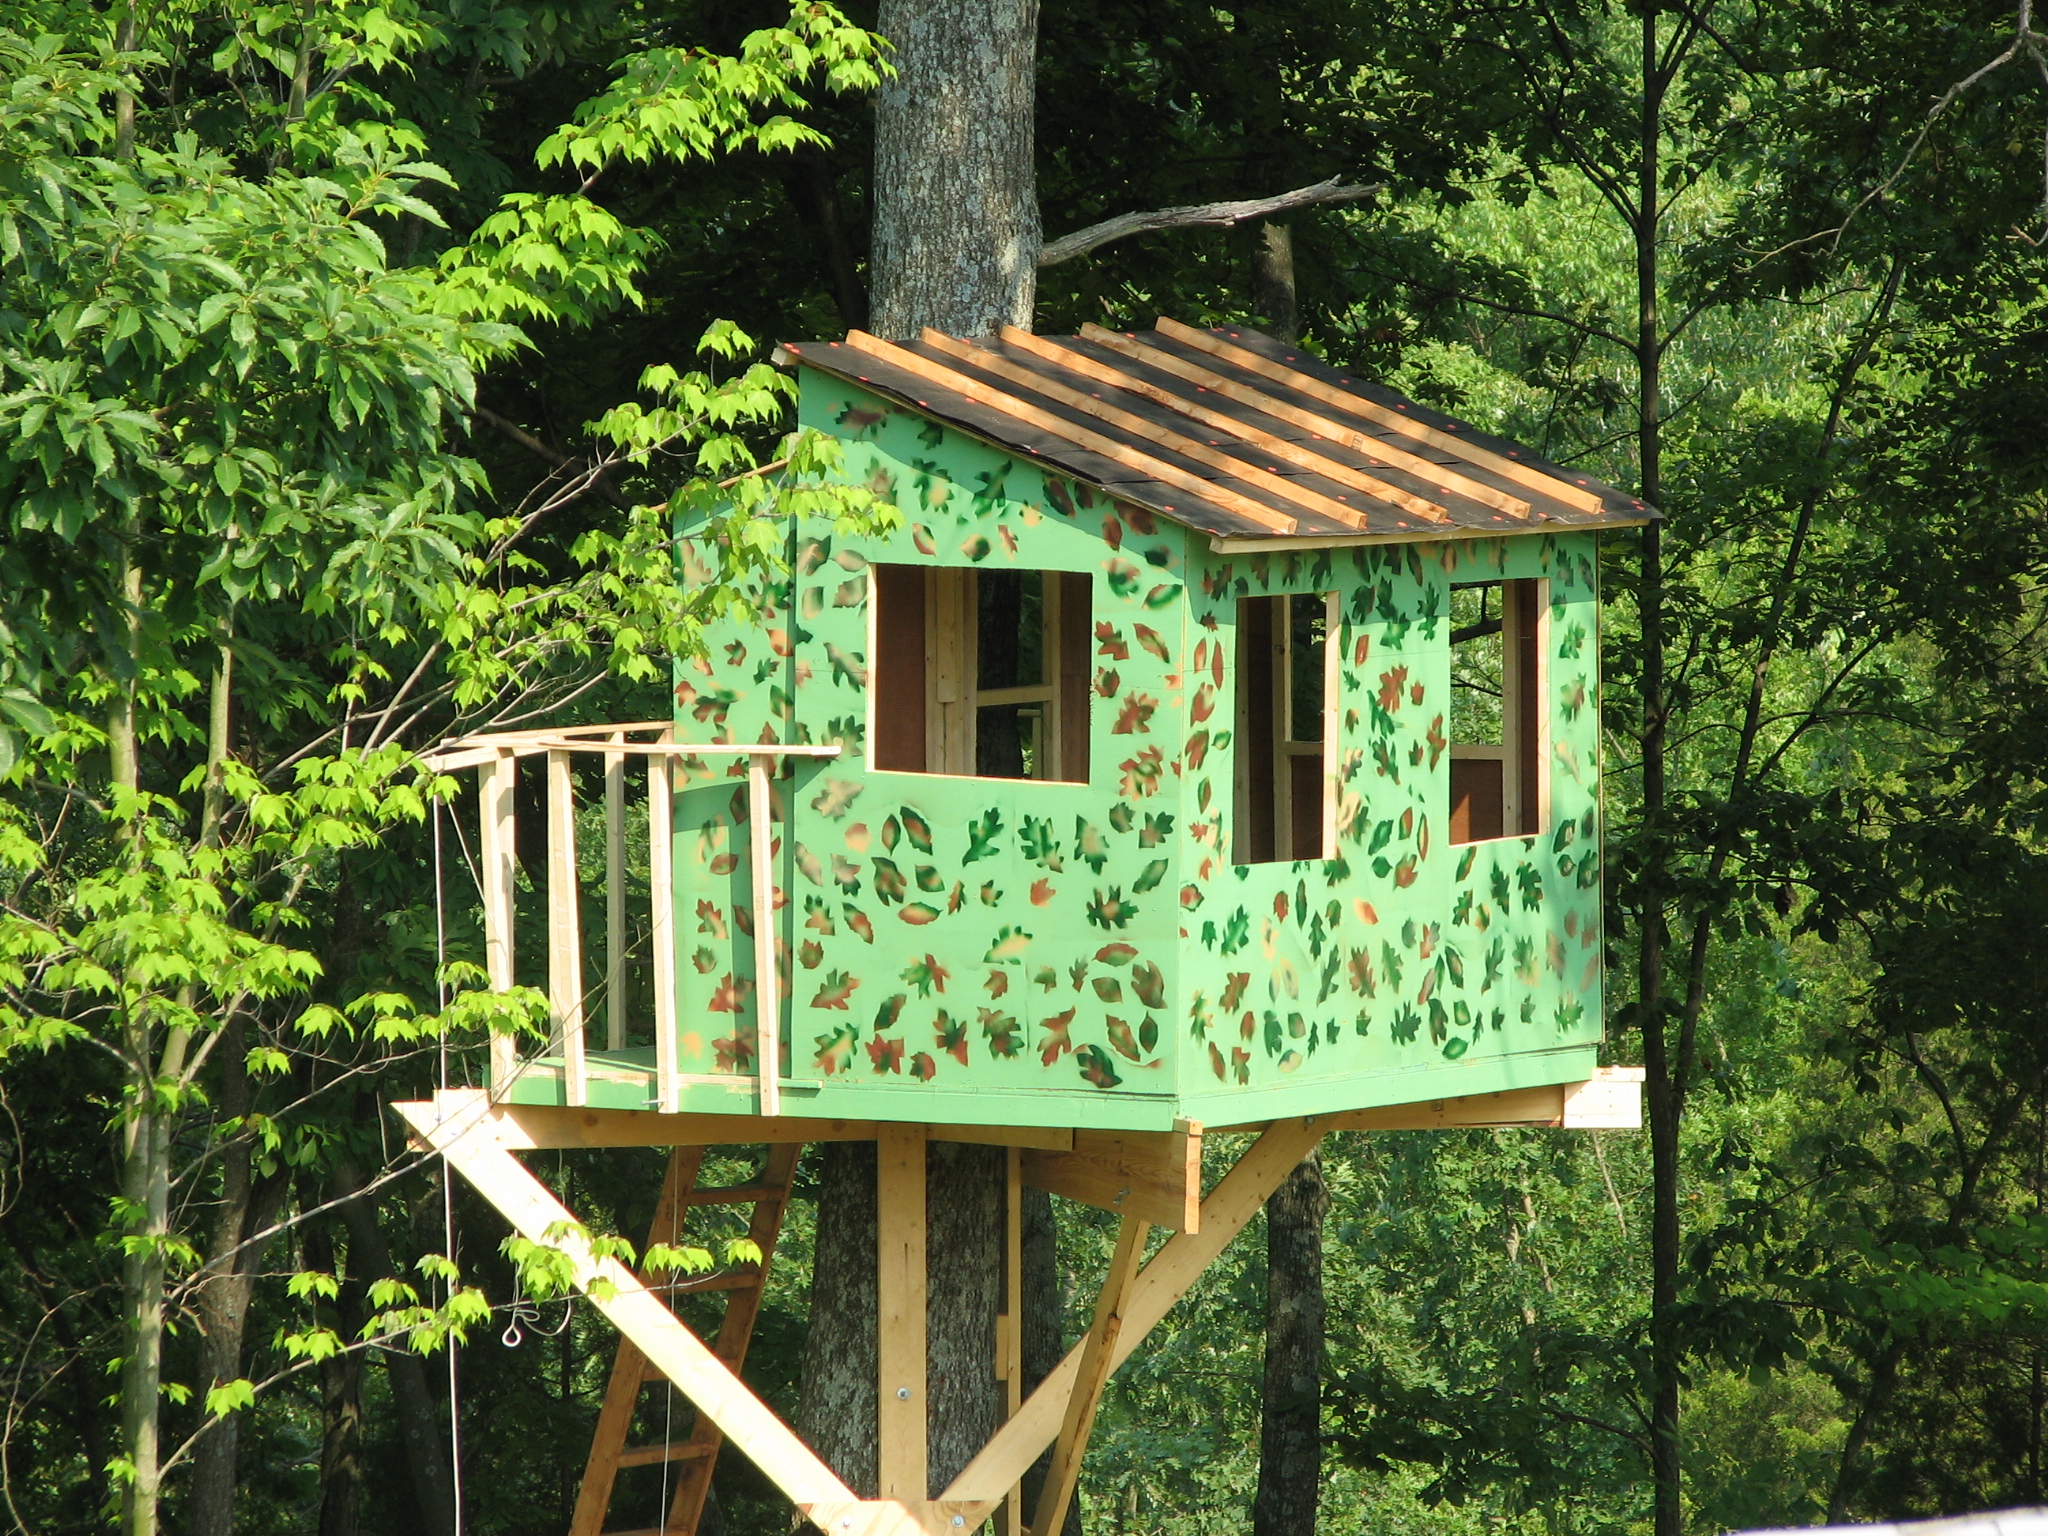 The new treehouse